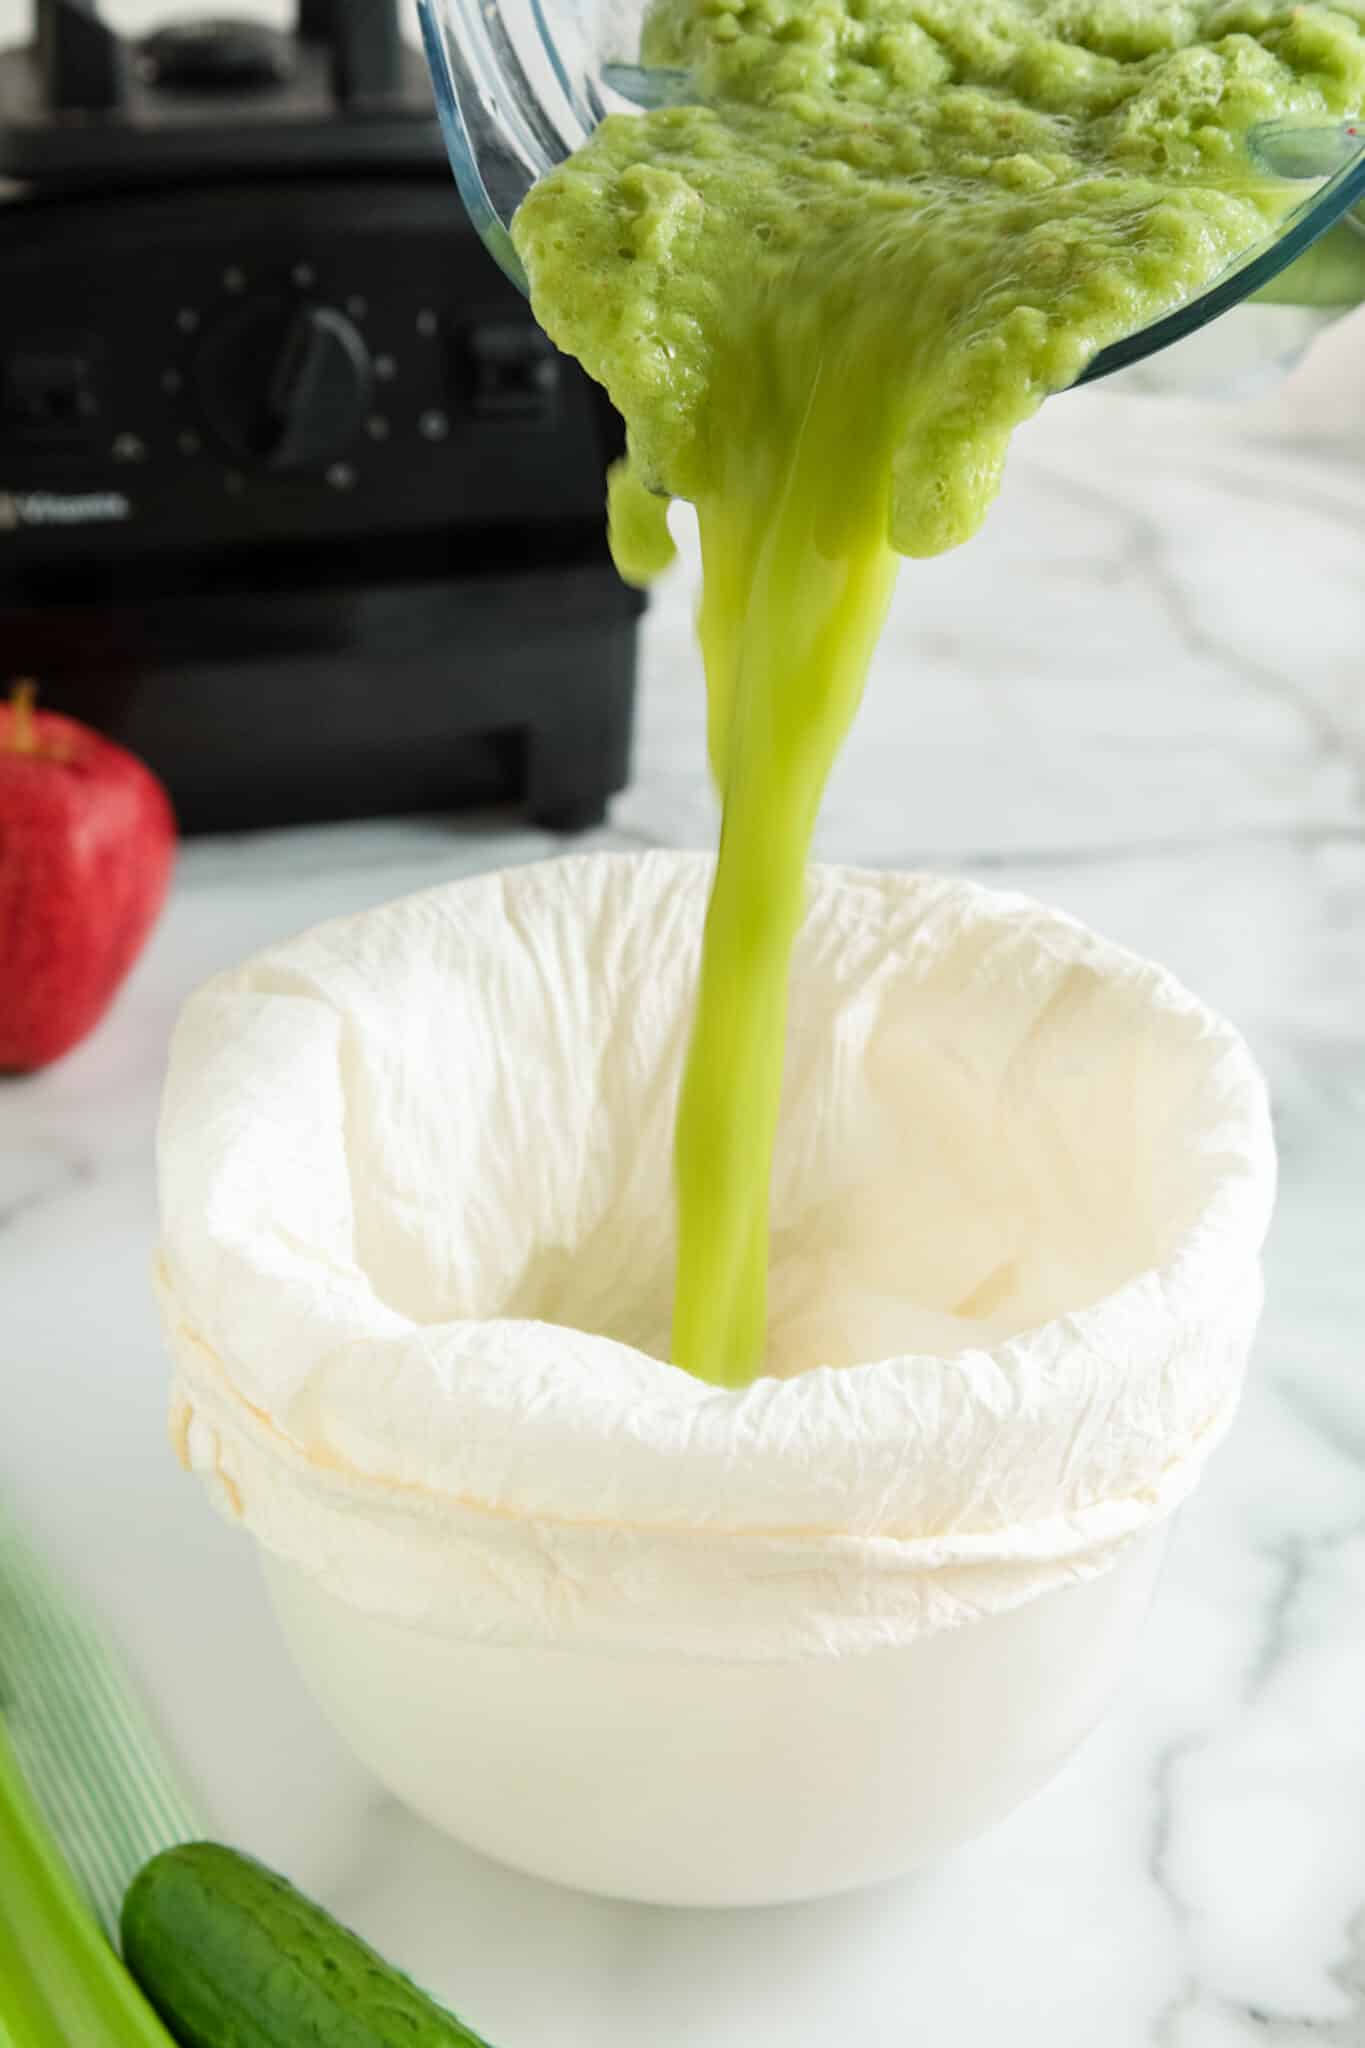 Cucumber celery juice being poured from a blender into a nut milk bag.